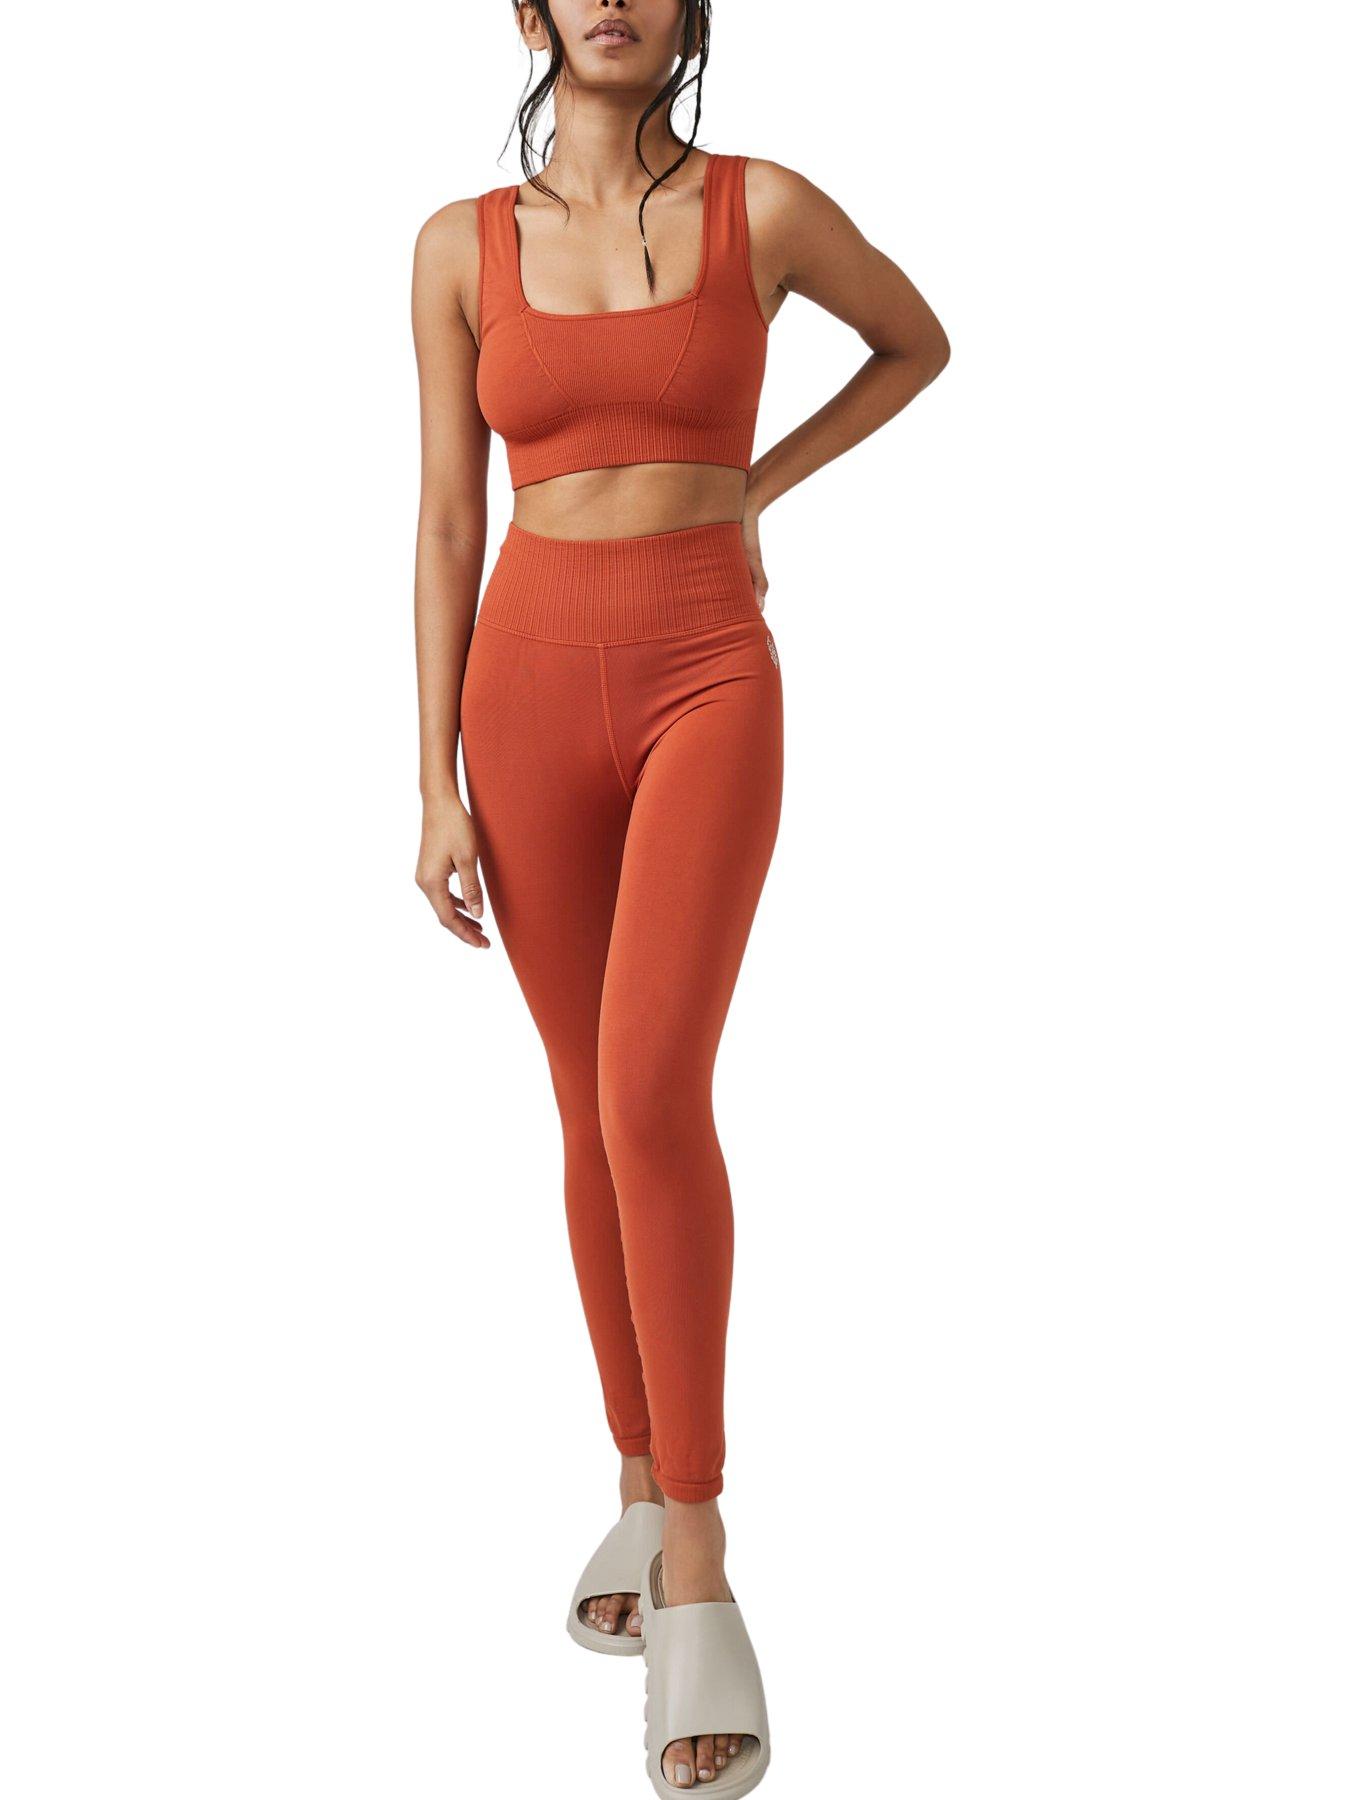 Best Fabric For Sports Leggings With International Society, 45% OFF